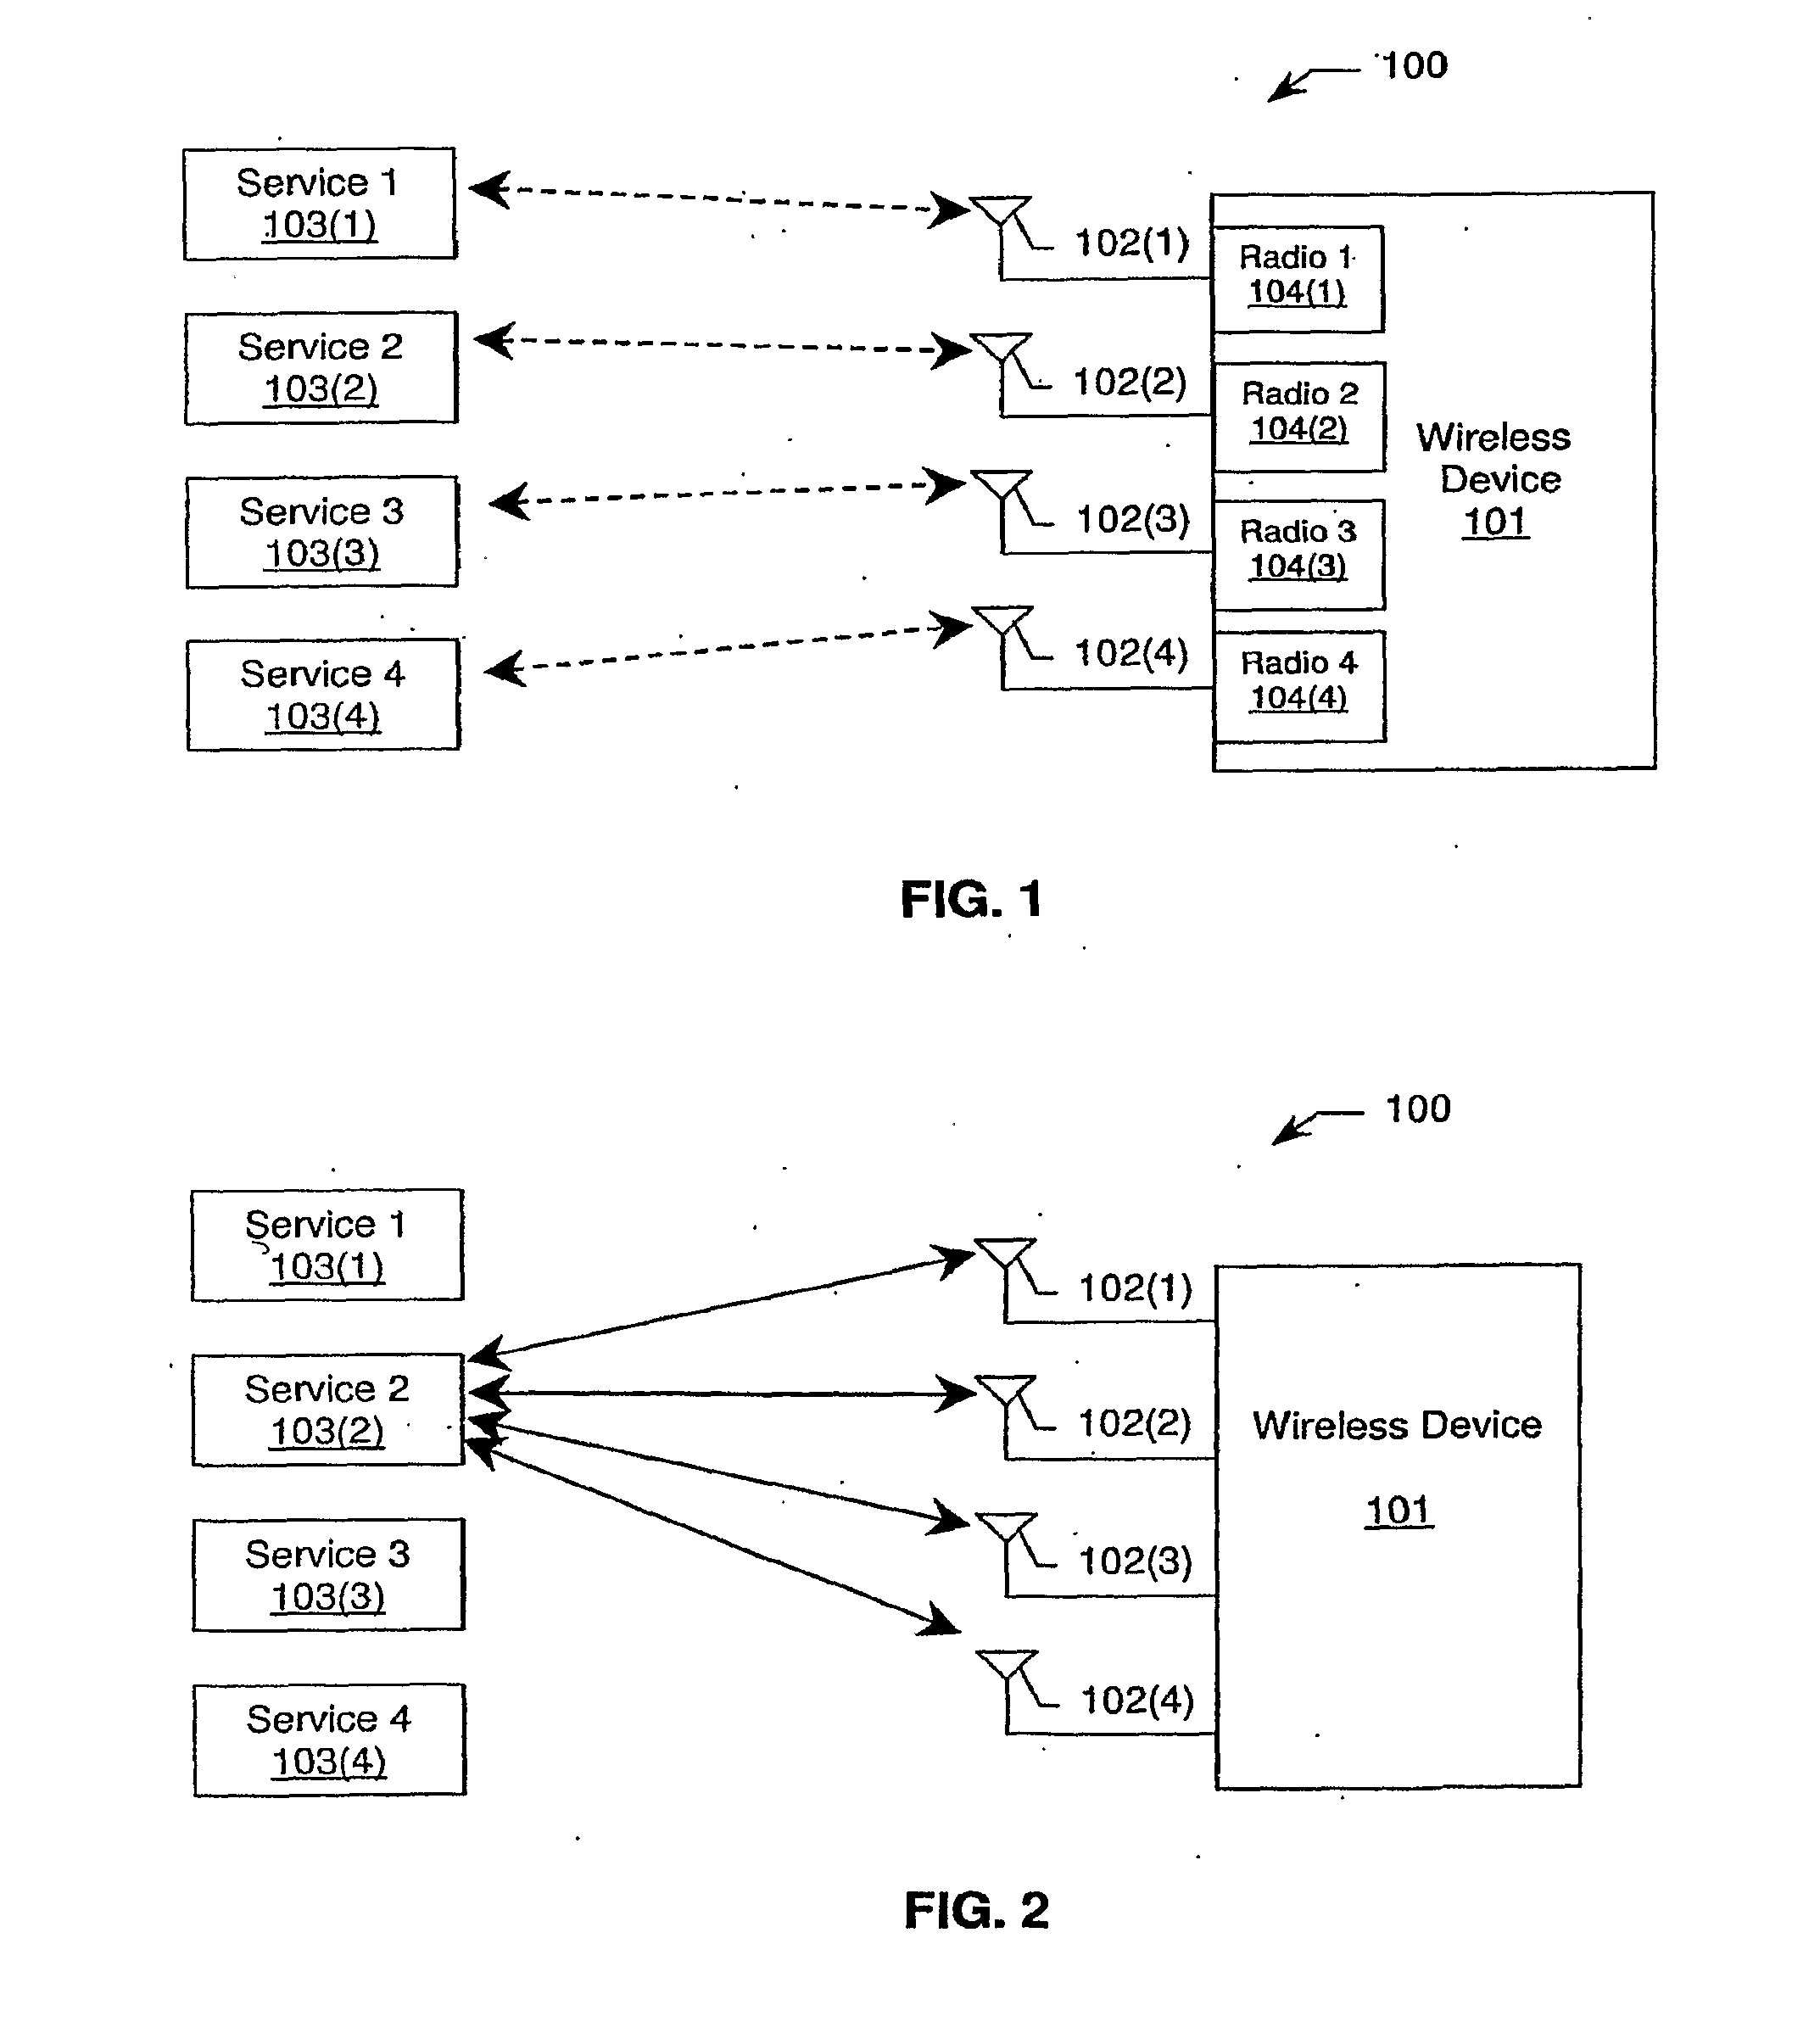 Scanning available wireless-device services in multiple wireless-radio technology communication systems